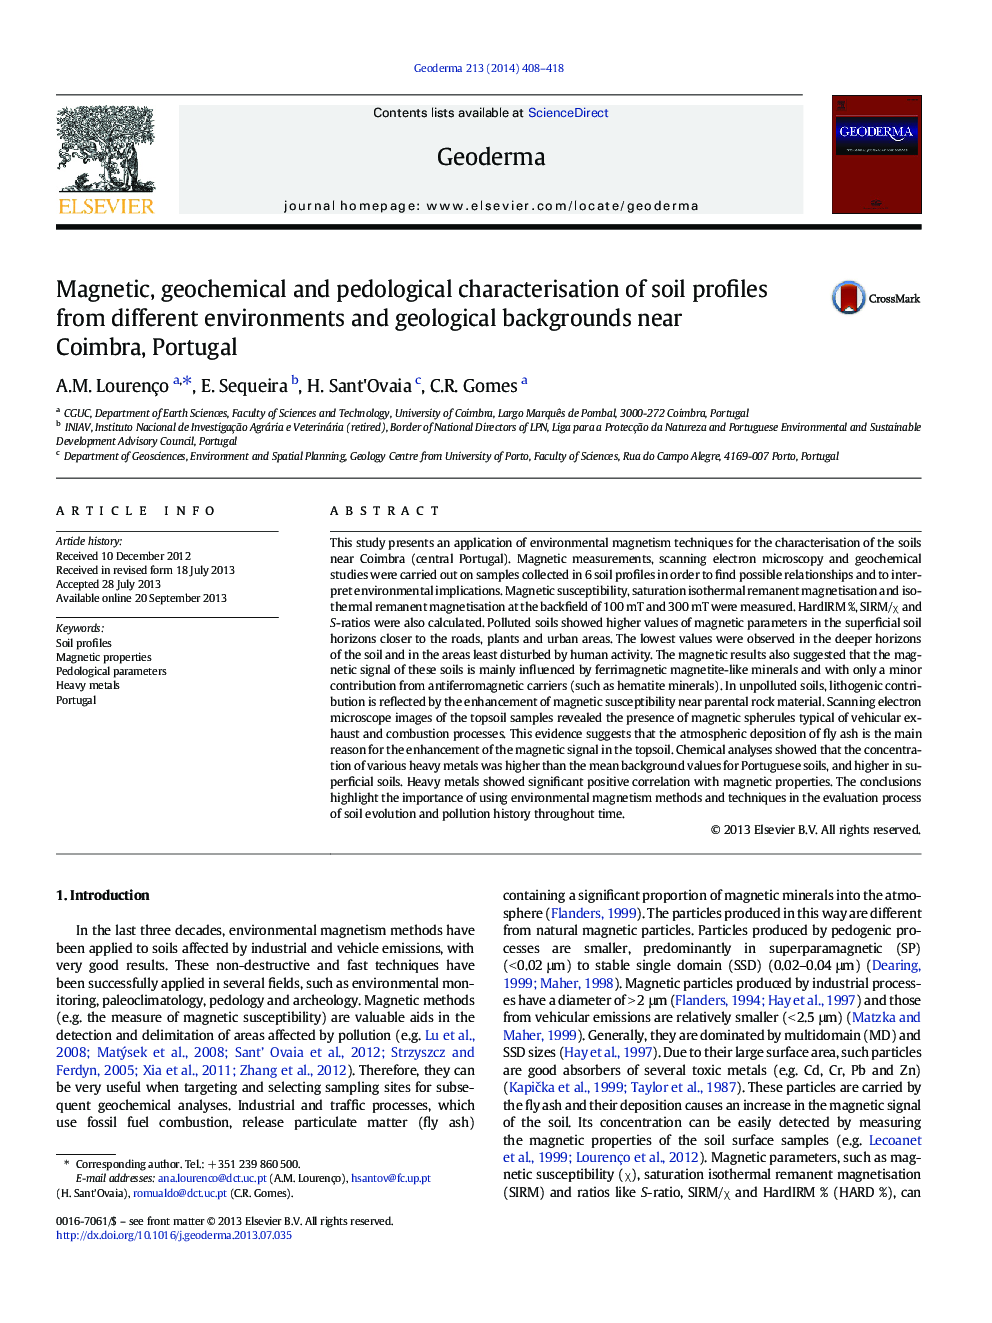 Magnetic, geochemical and pedological characterisation of soil profiles from different environments and geological backgrounds near Coimbra, Portugal